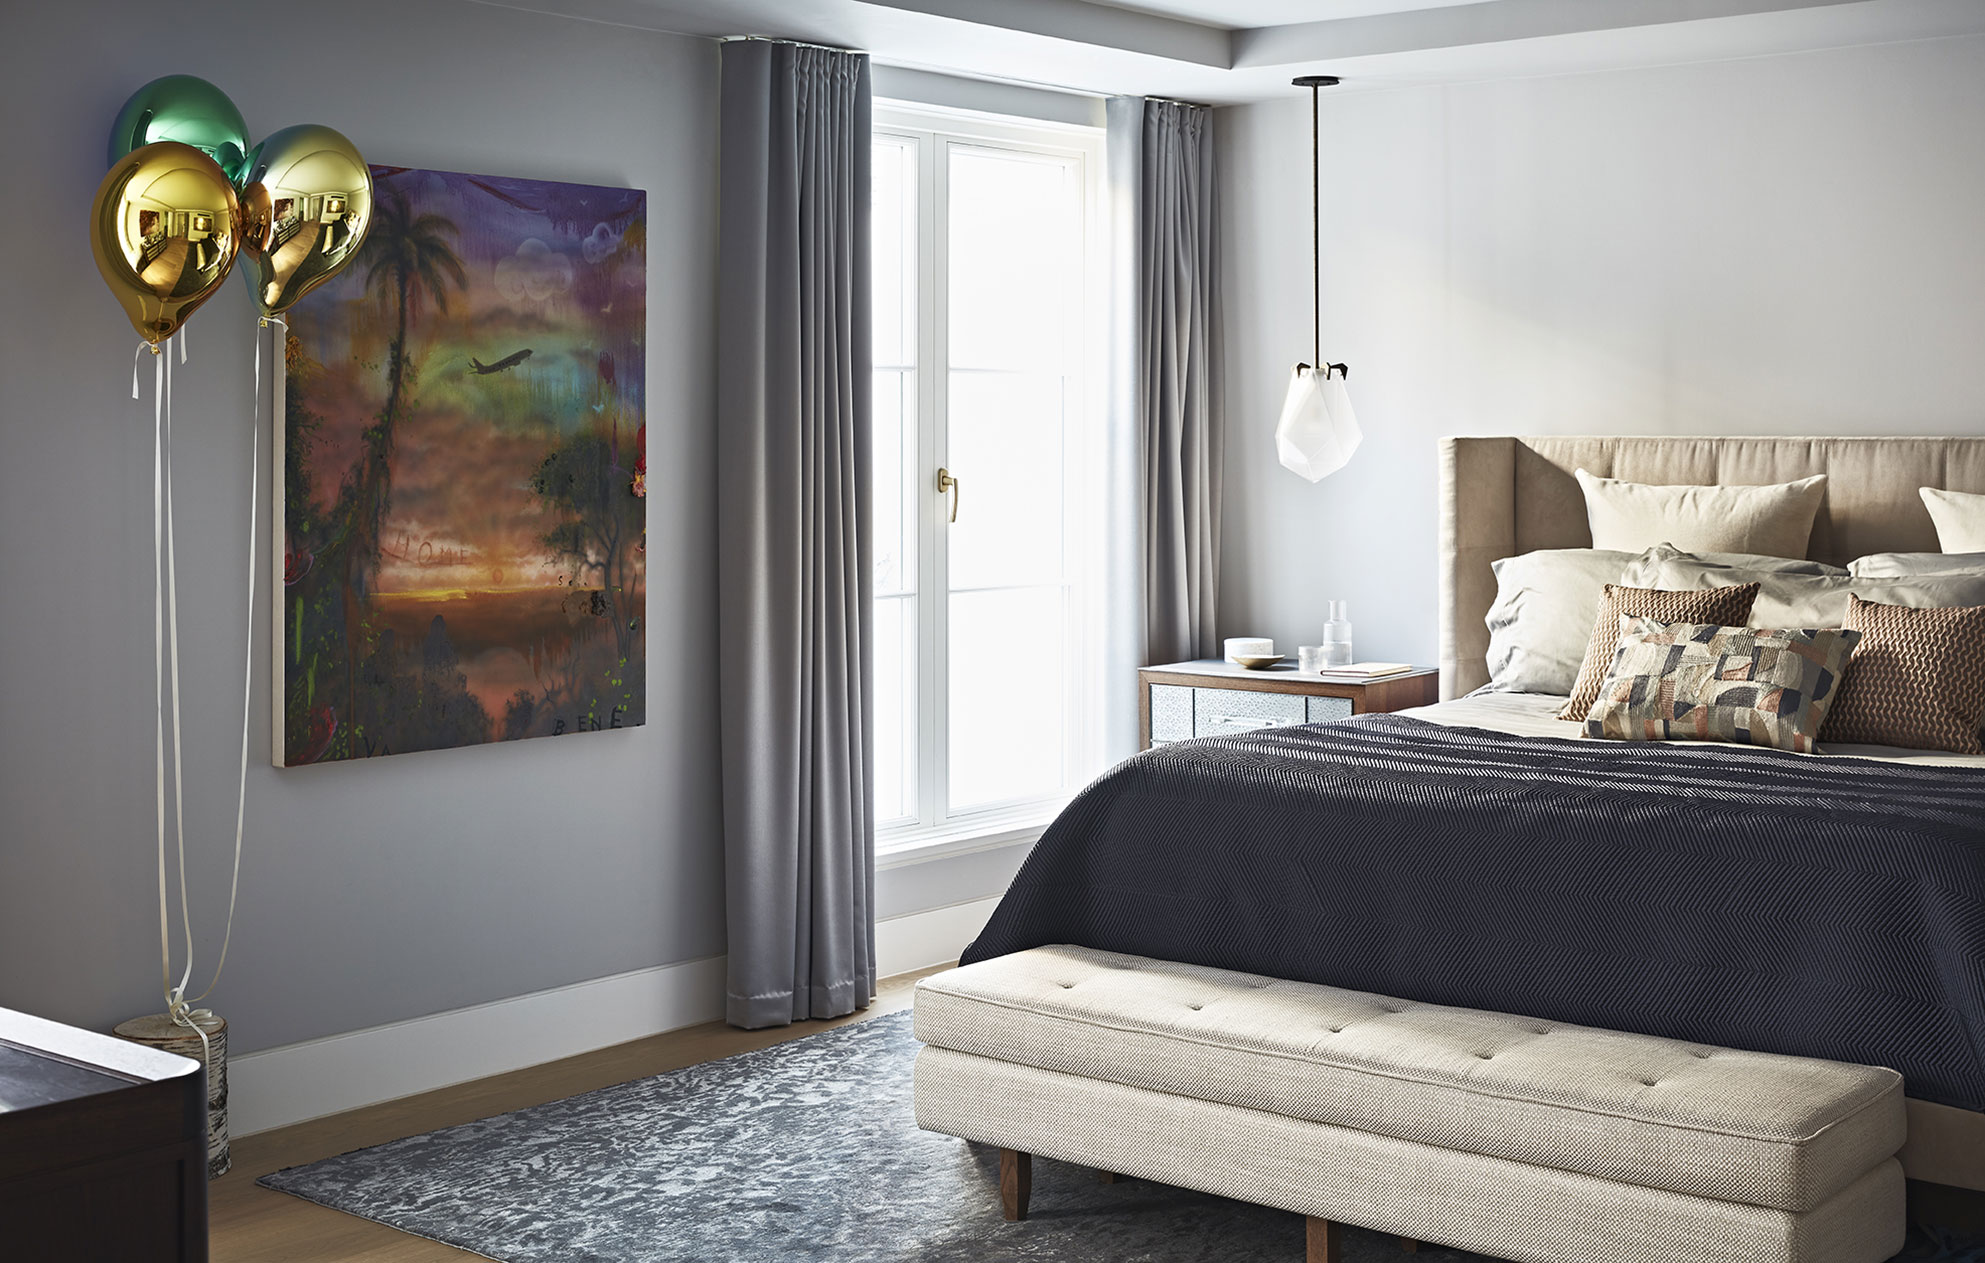 Bespoke interior design by Godrich for a Notting Hill mews house with unique artwork, luxury soft furnishings and a bed with a bedside table.